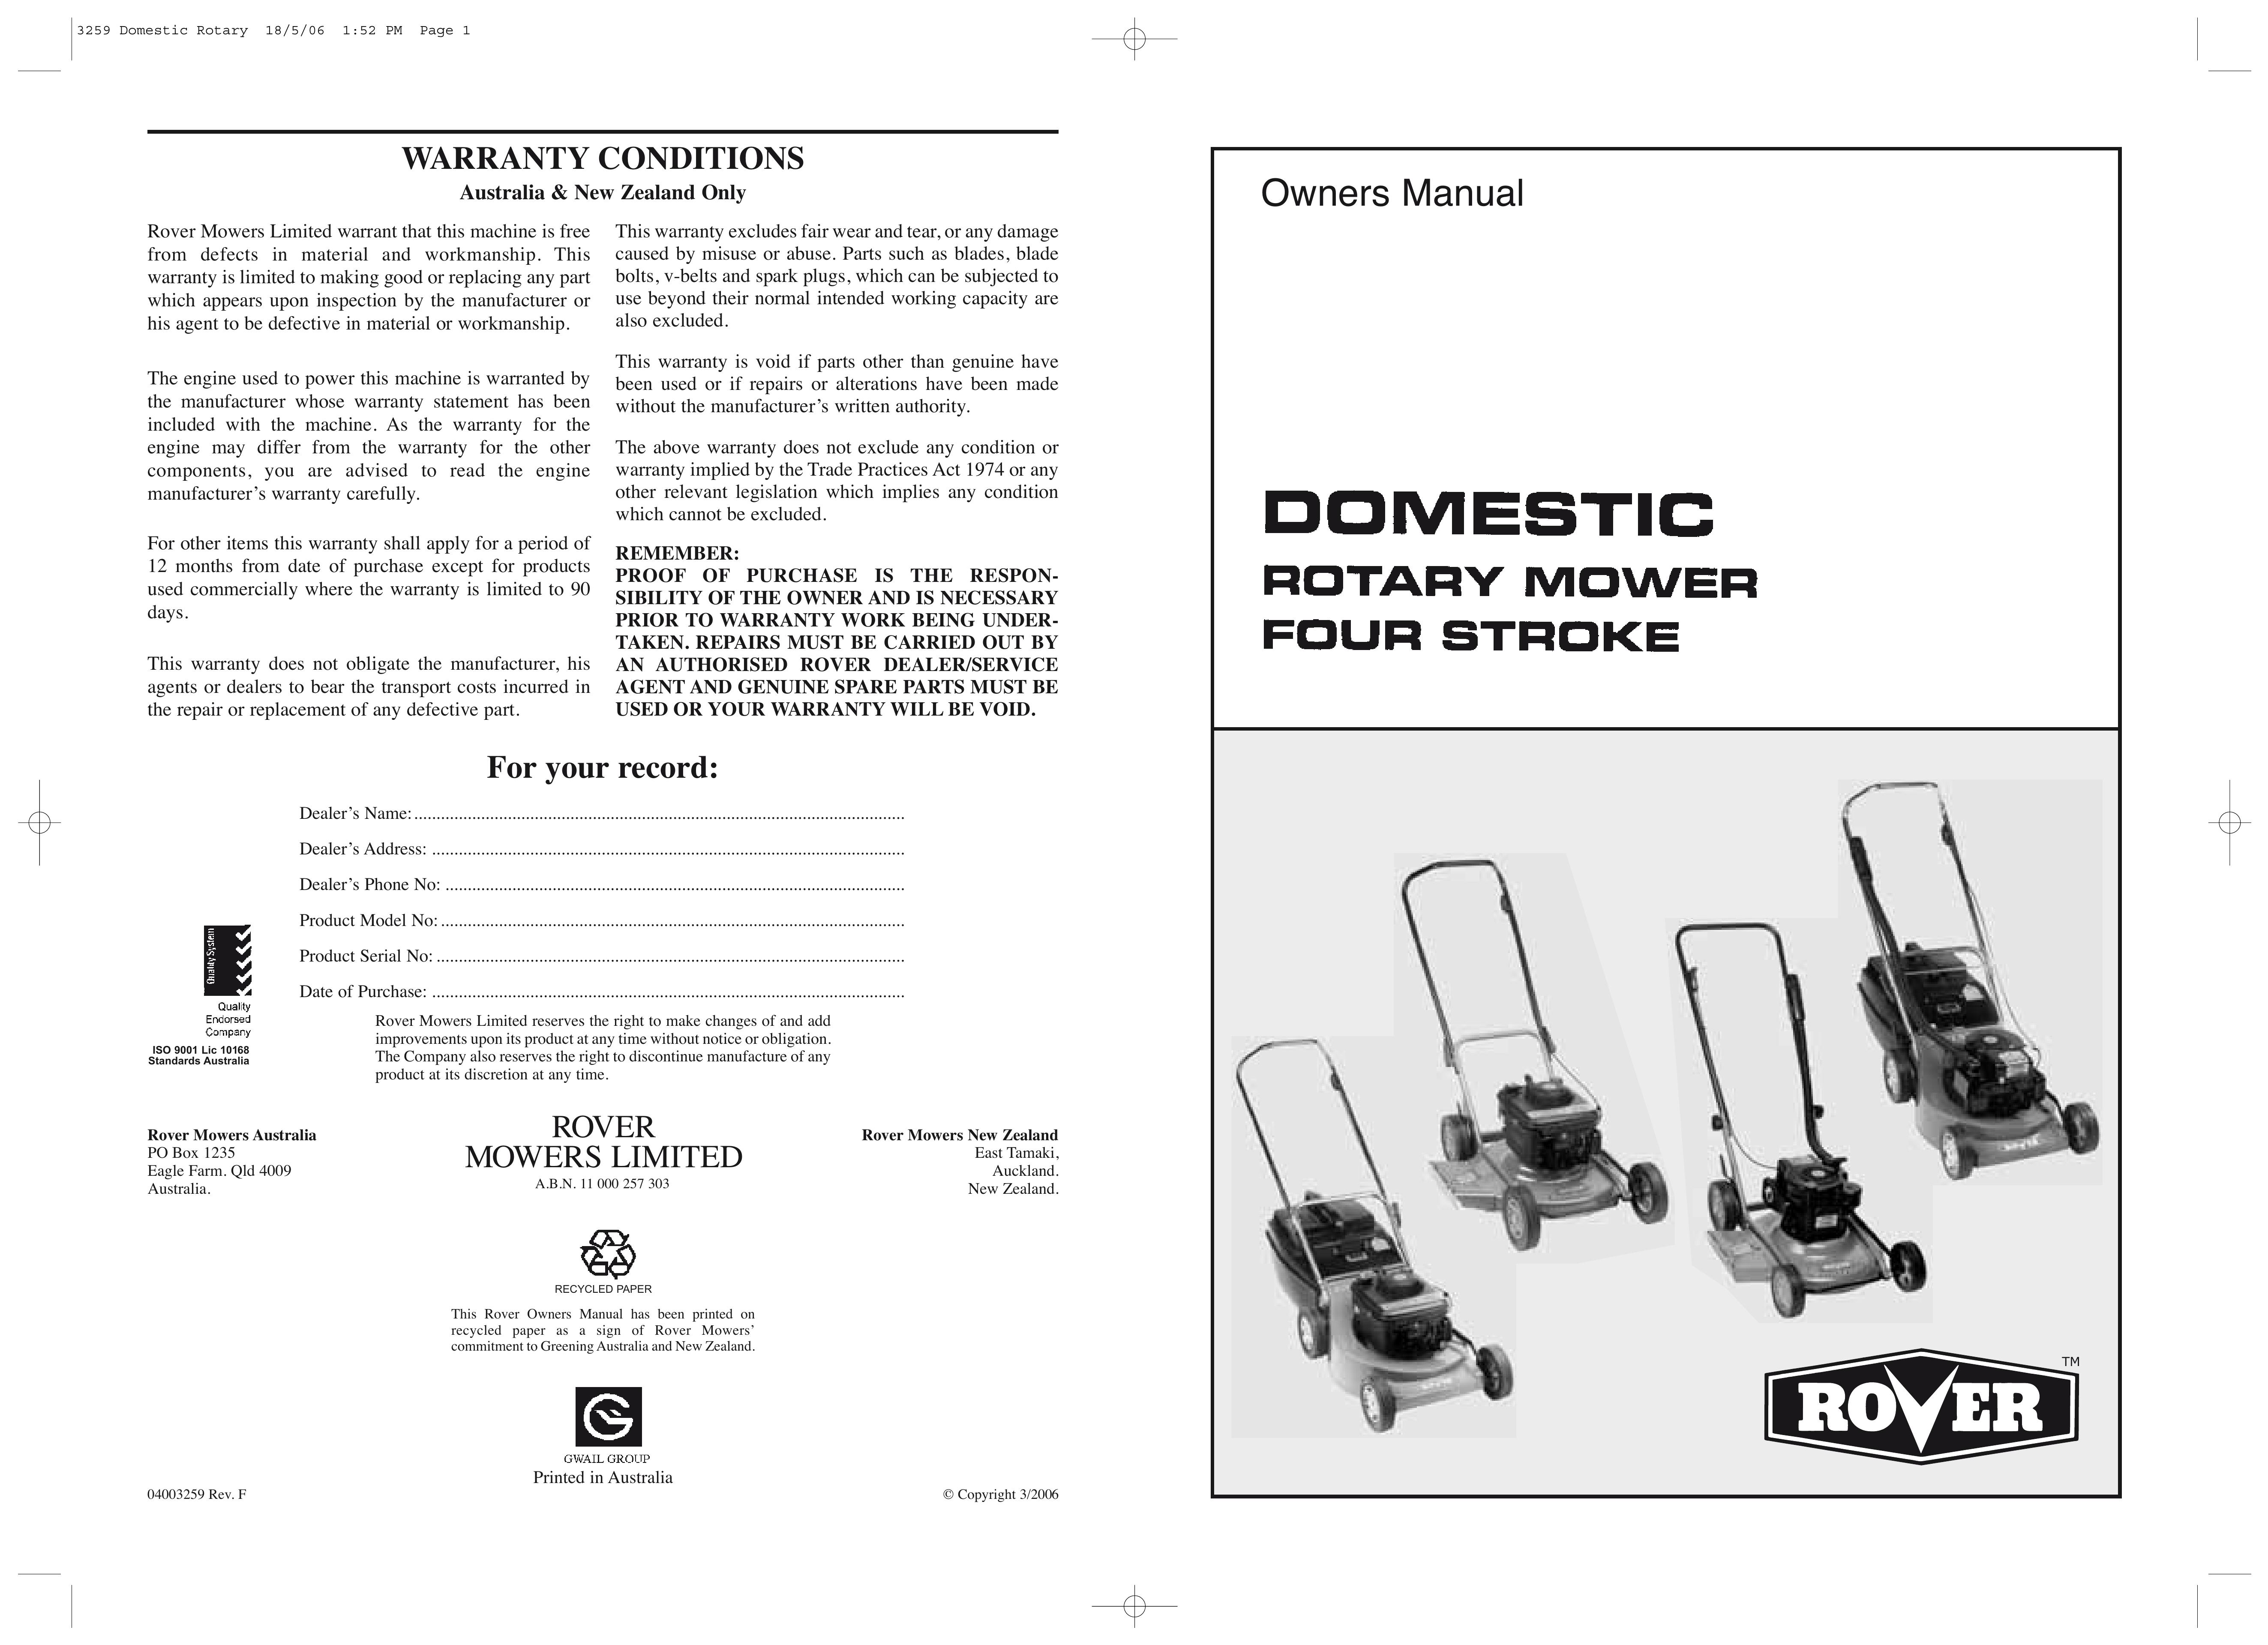 Rover Domestic Rotary Mower Lawn Mower User Manual